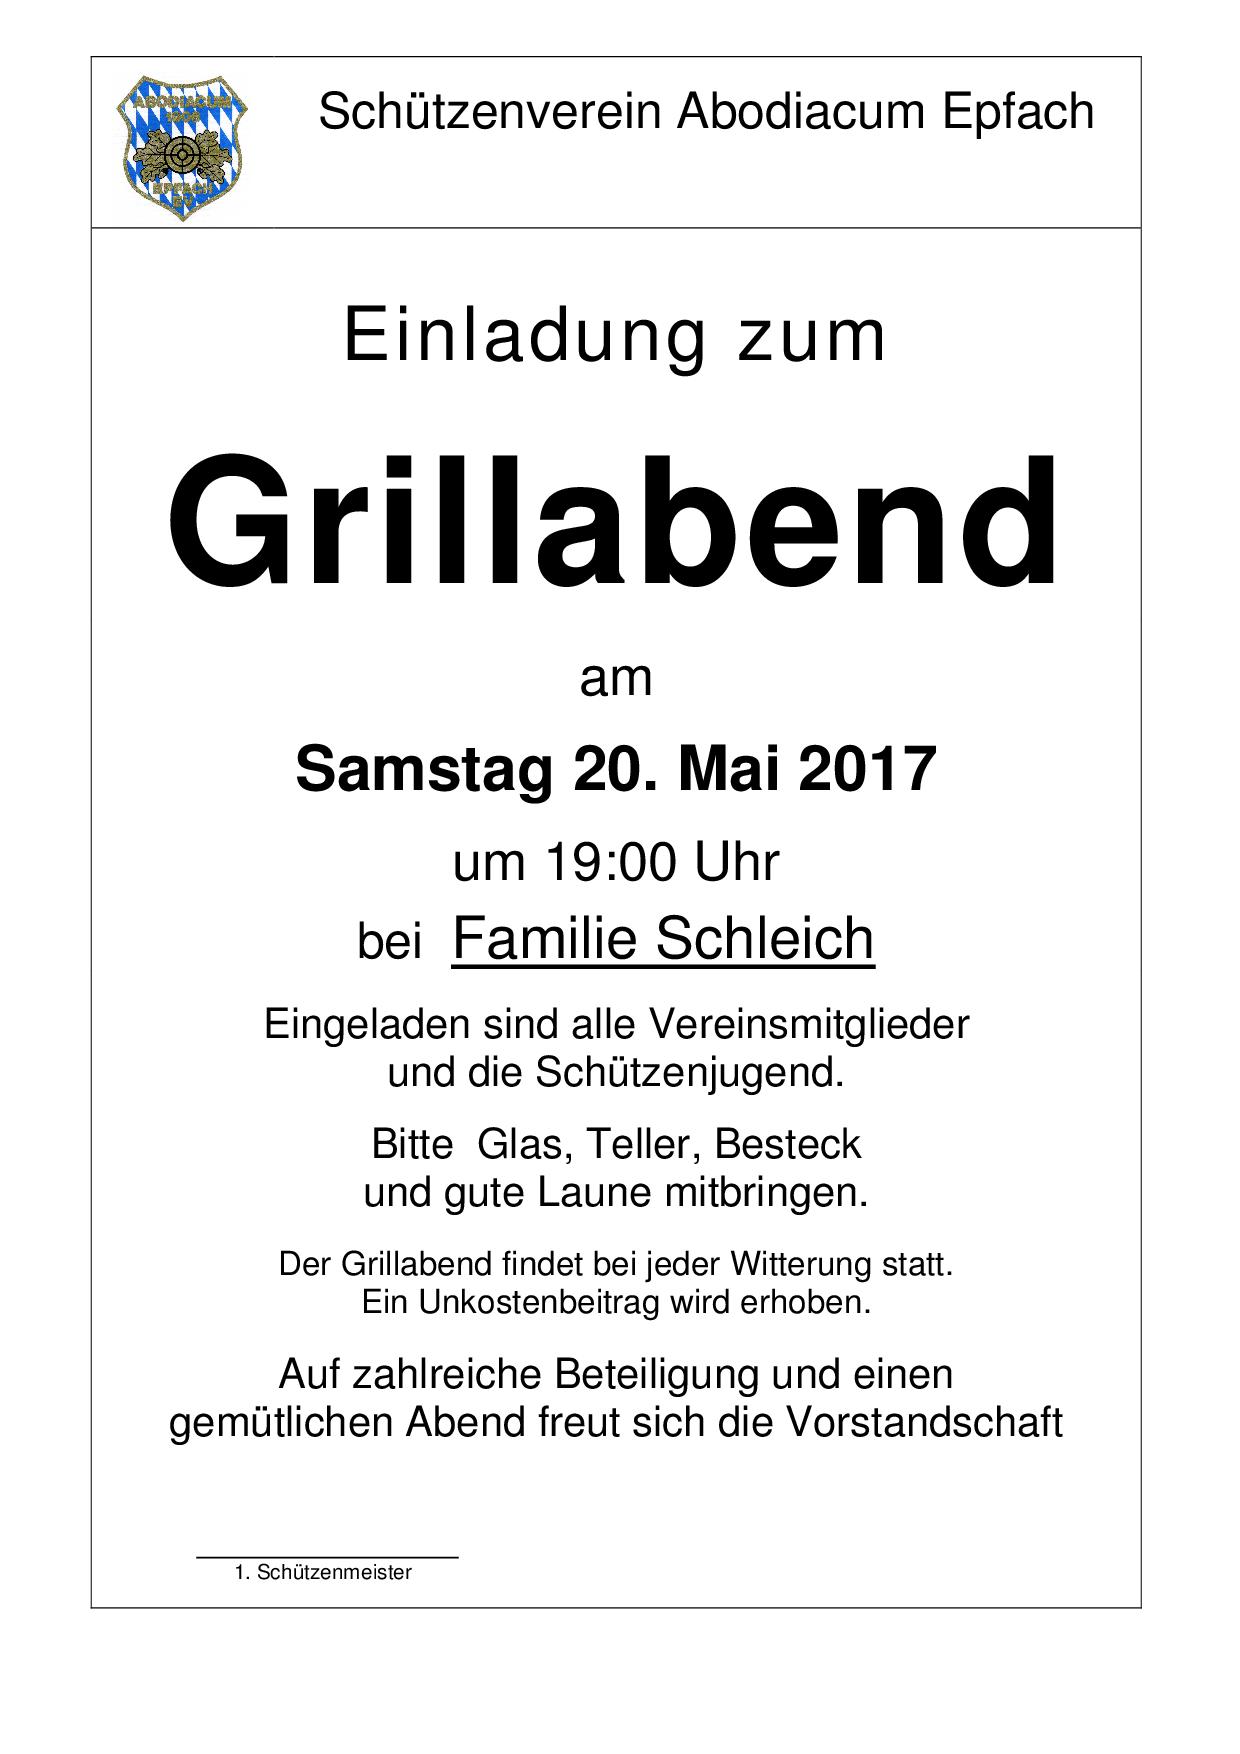 Grillabend 2017